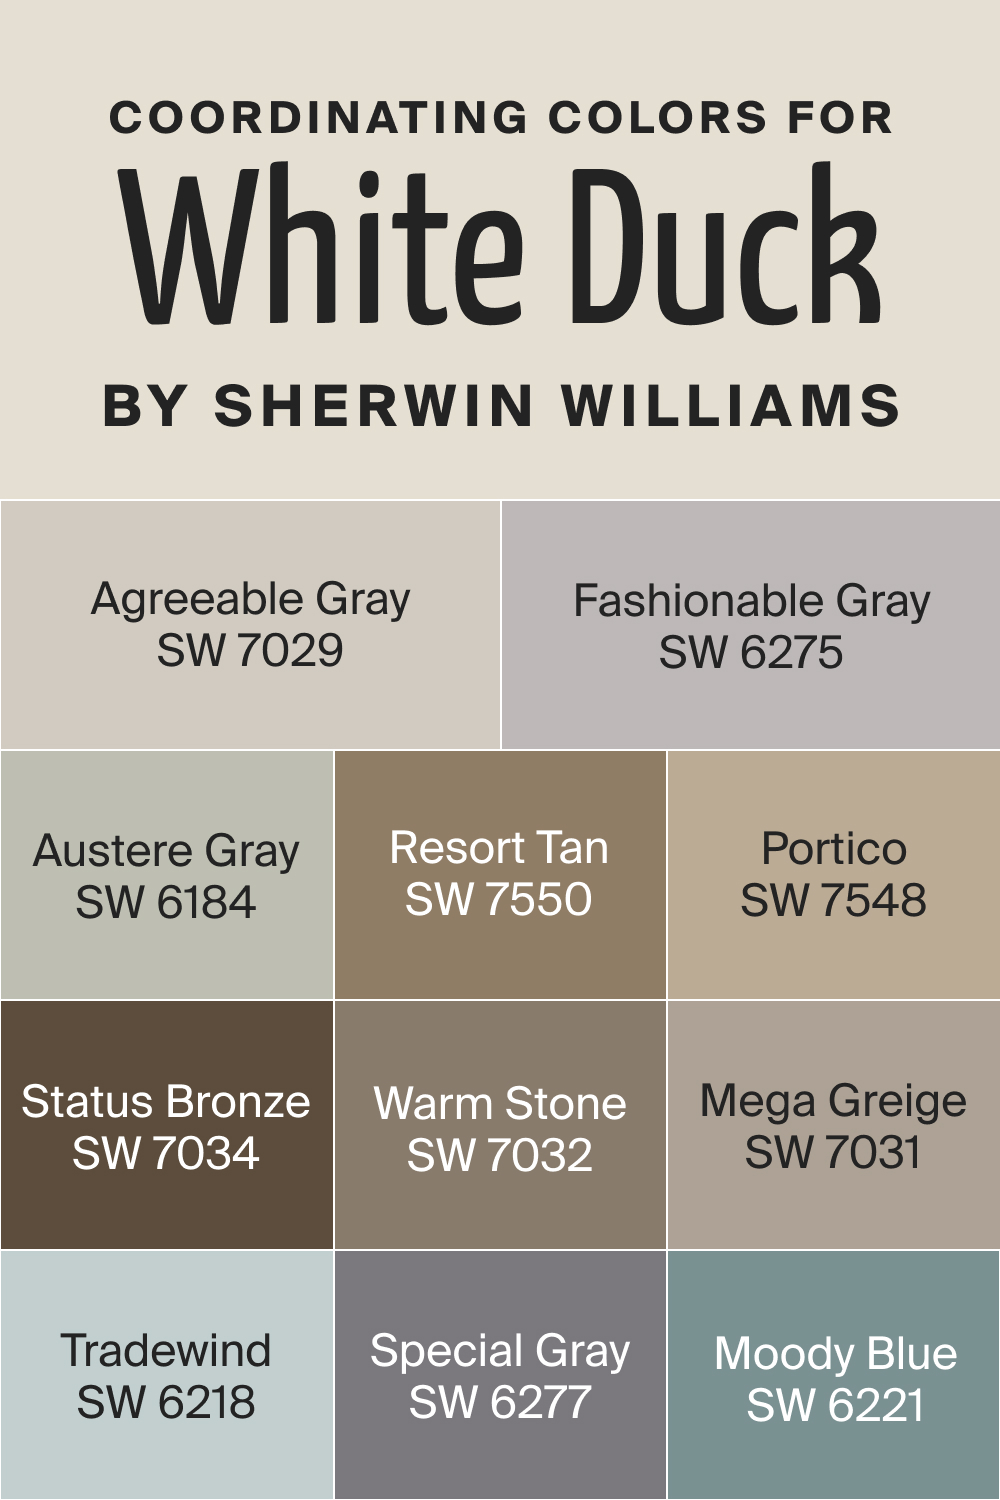 Coordinating Colors for SW White Duck by Sherwin Williams